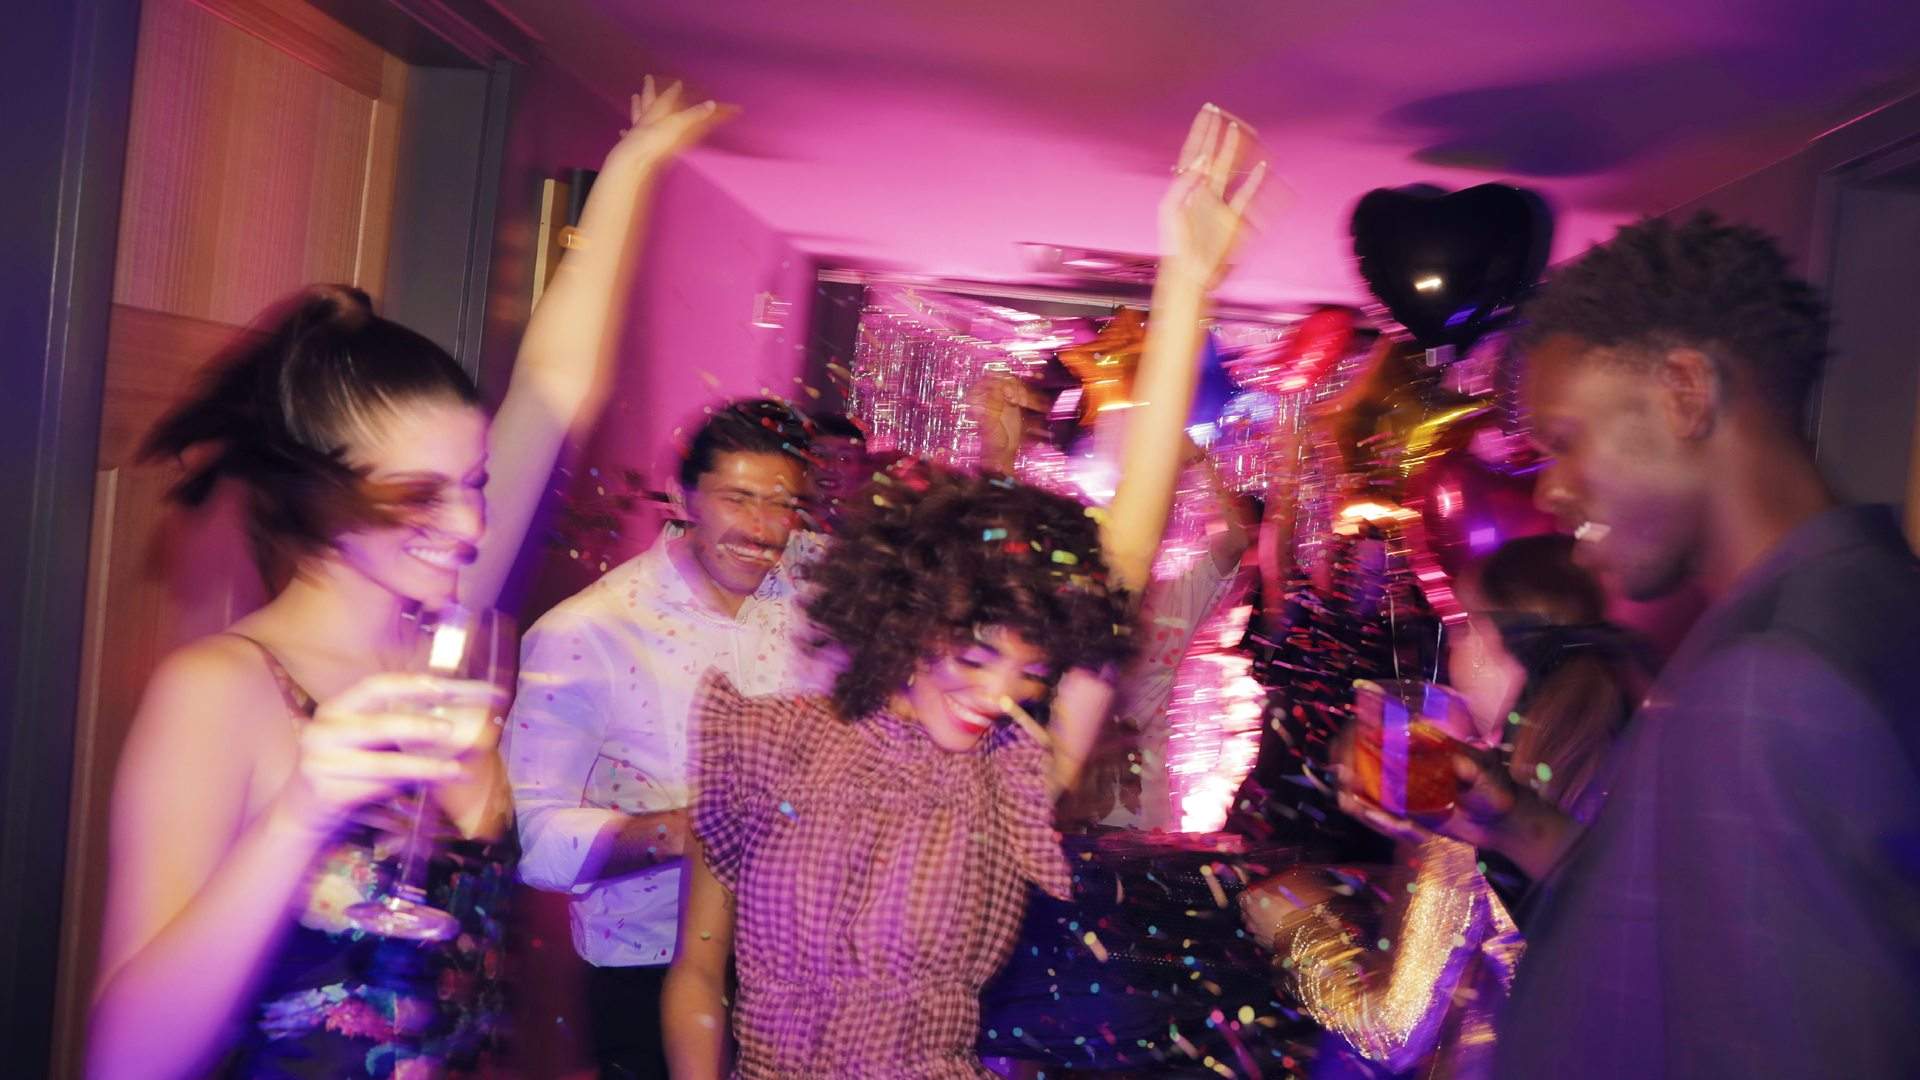 You Can Now Book an Entire QT Hotel Floor to Party with Your Mates